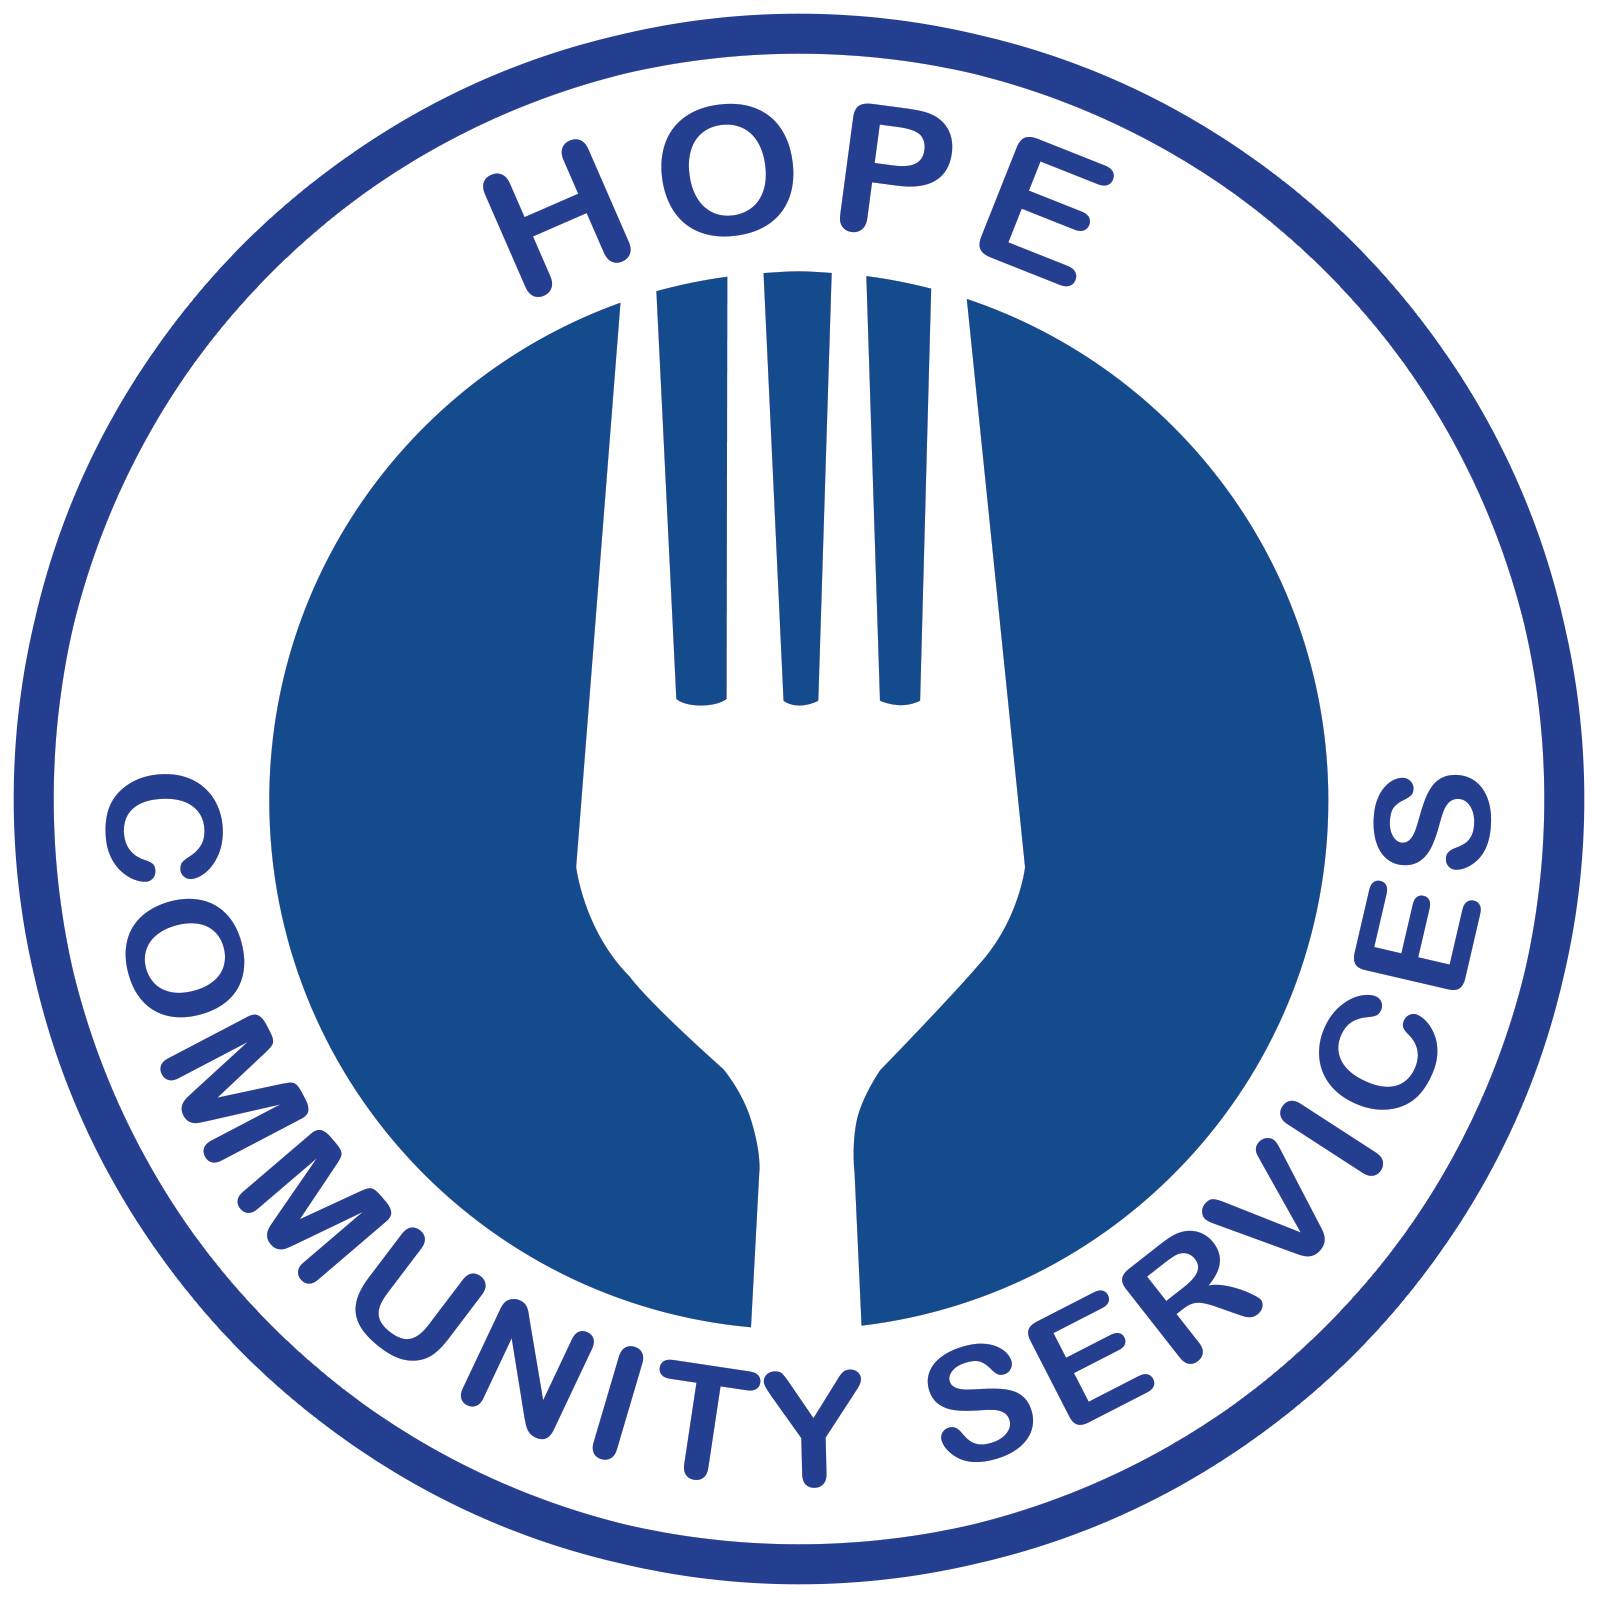 HOPE Community Services